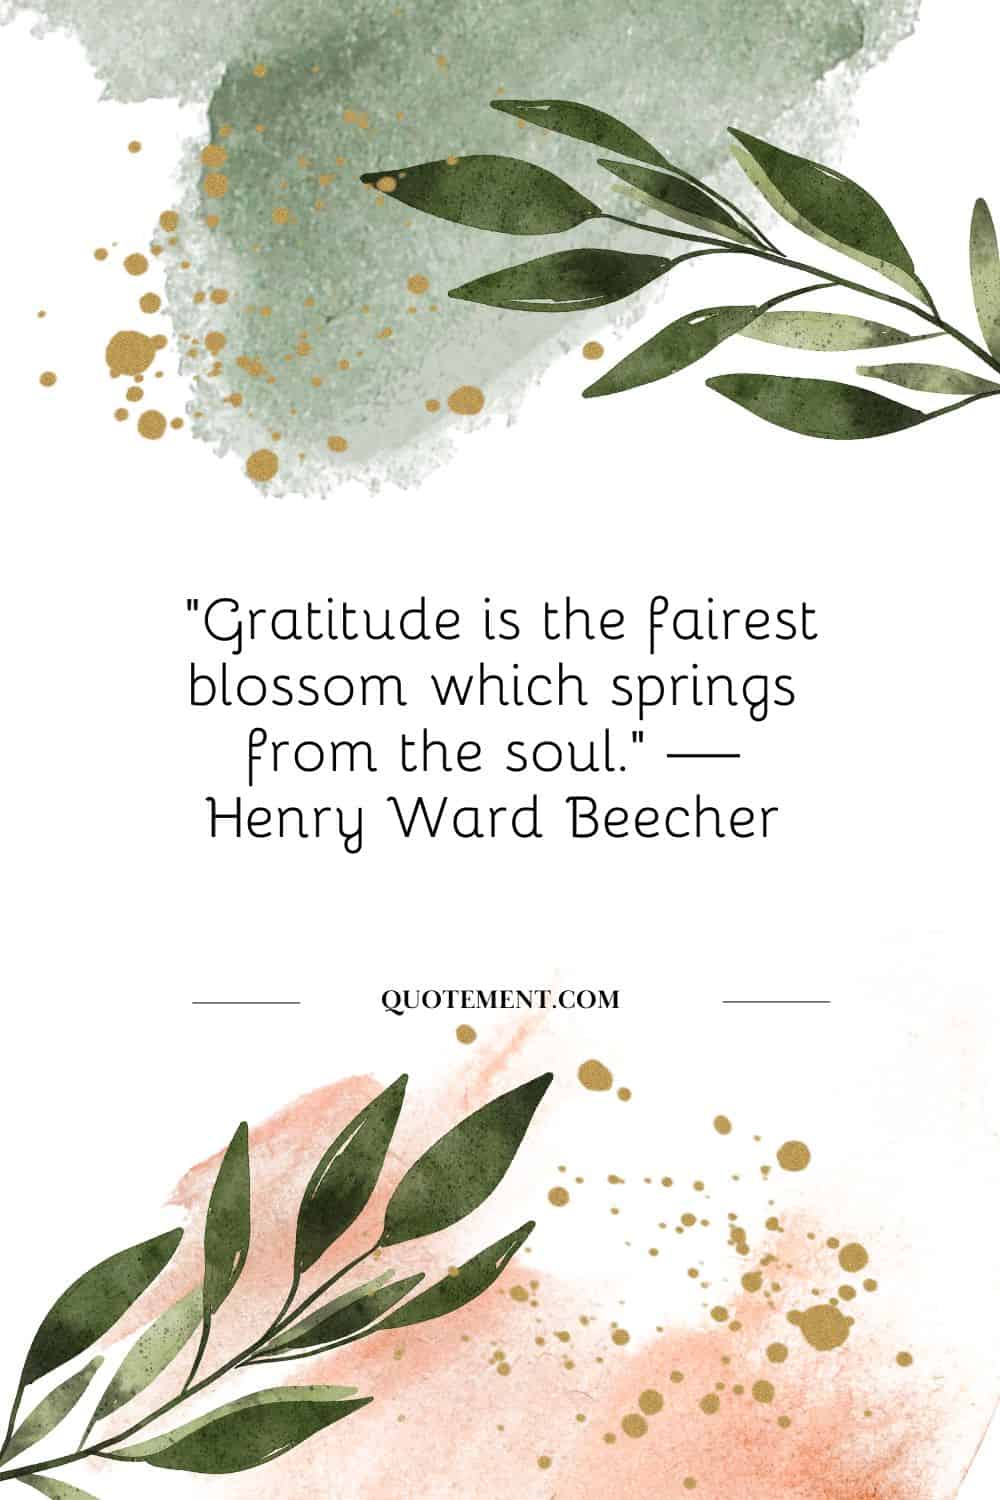 ”Gratitude is the fairest blossom which springs from the soul.” — Henry Ward Beecher